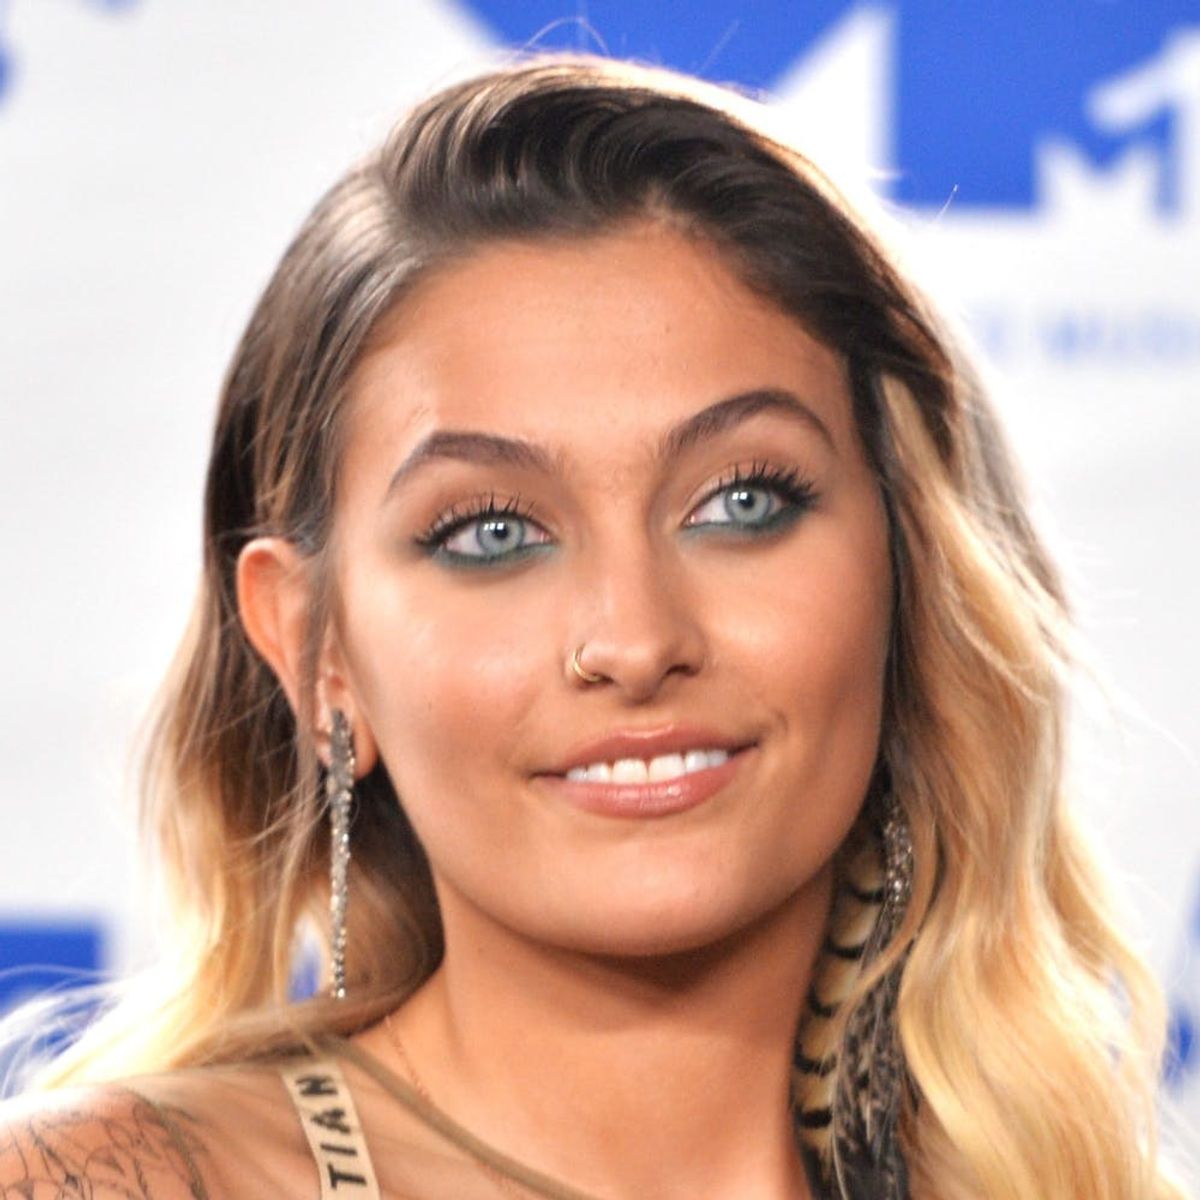 Paris Jackson Reveals New Chest Tattoo With a Body Positive Message